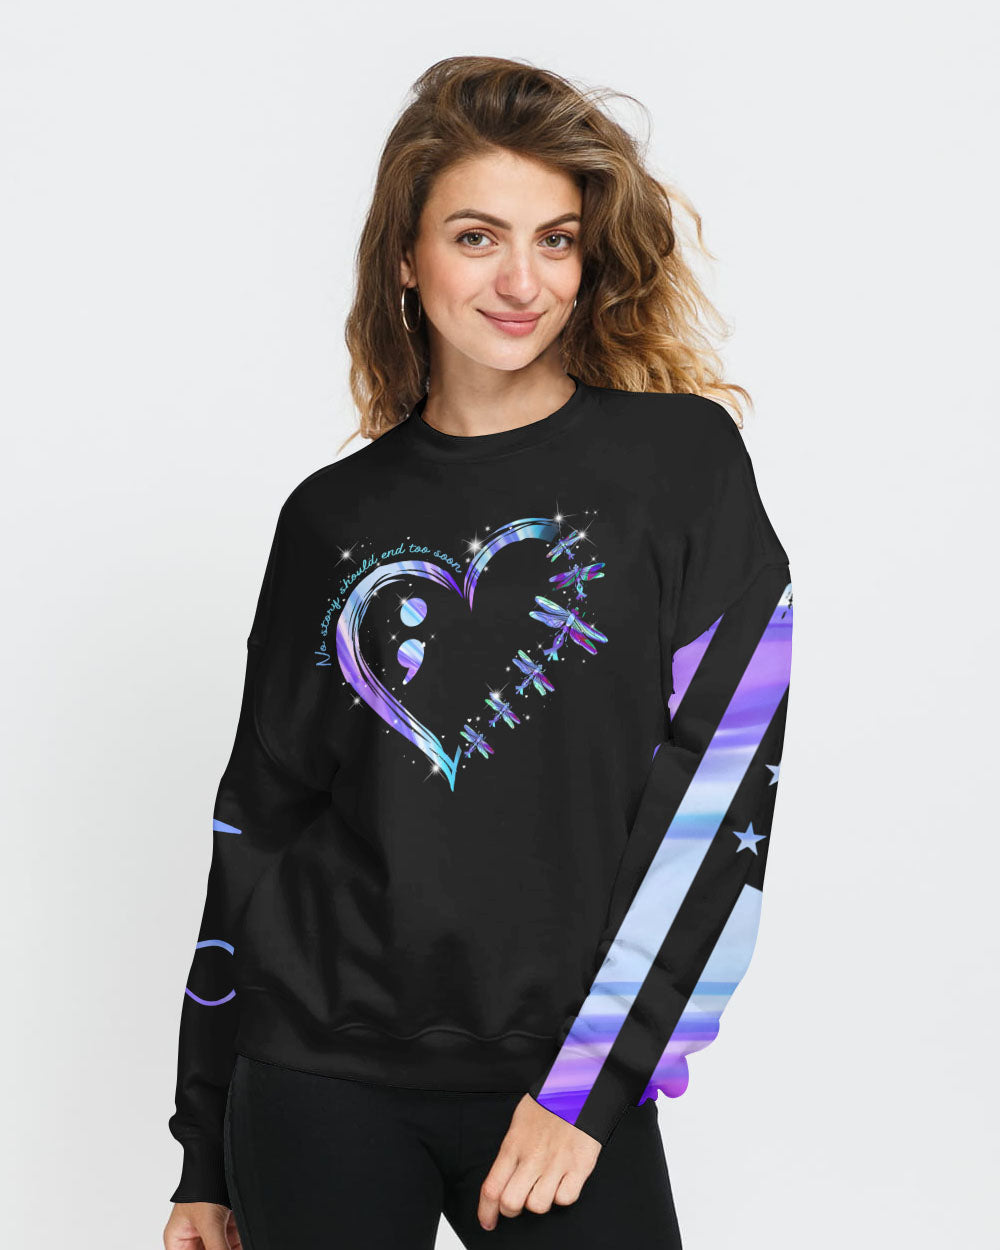 Dragonfly Fight Holographic Flag Women's Suicide Prevention Awareness Sweatshirt